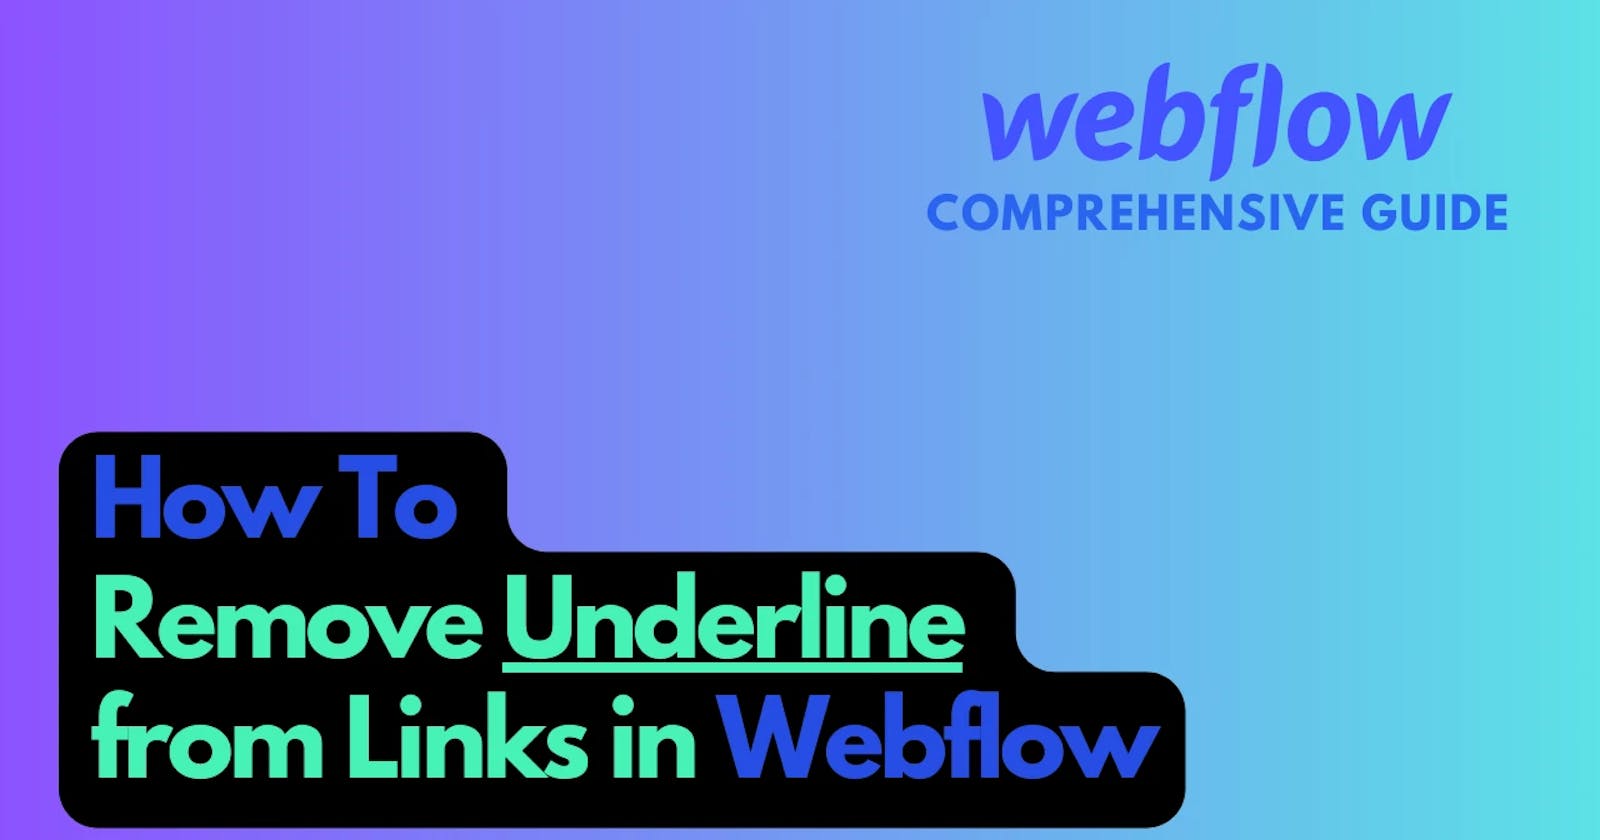 How to Remove Underline from Links in Webflow